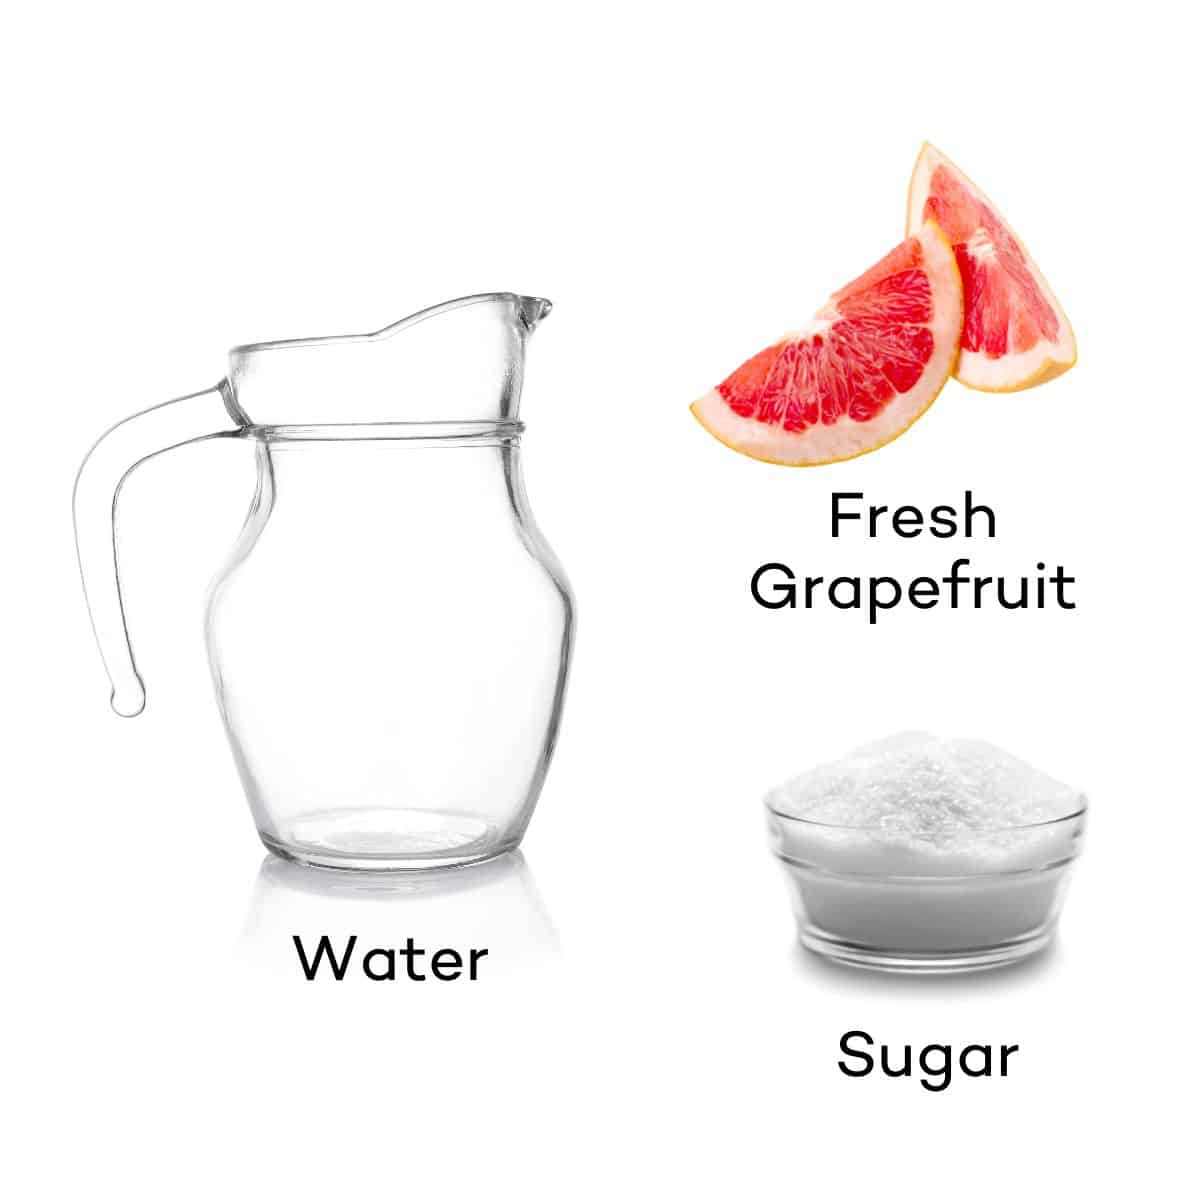 Ingredients for grapefruit syrup.